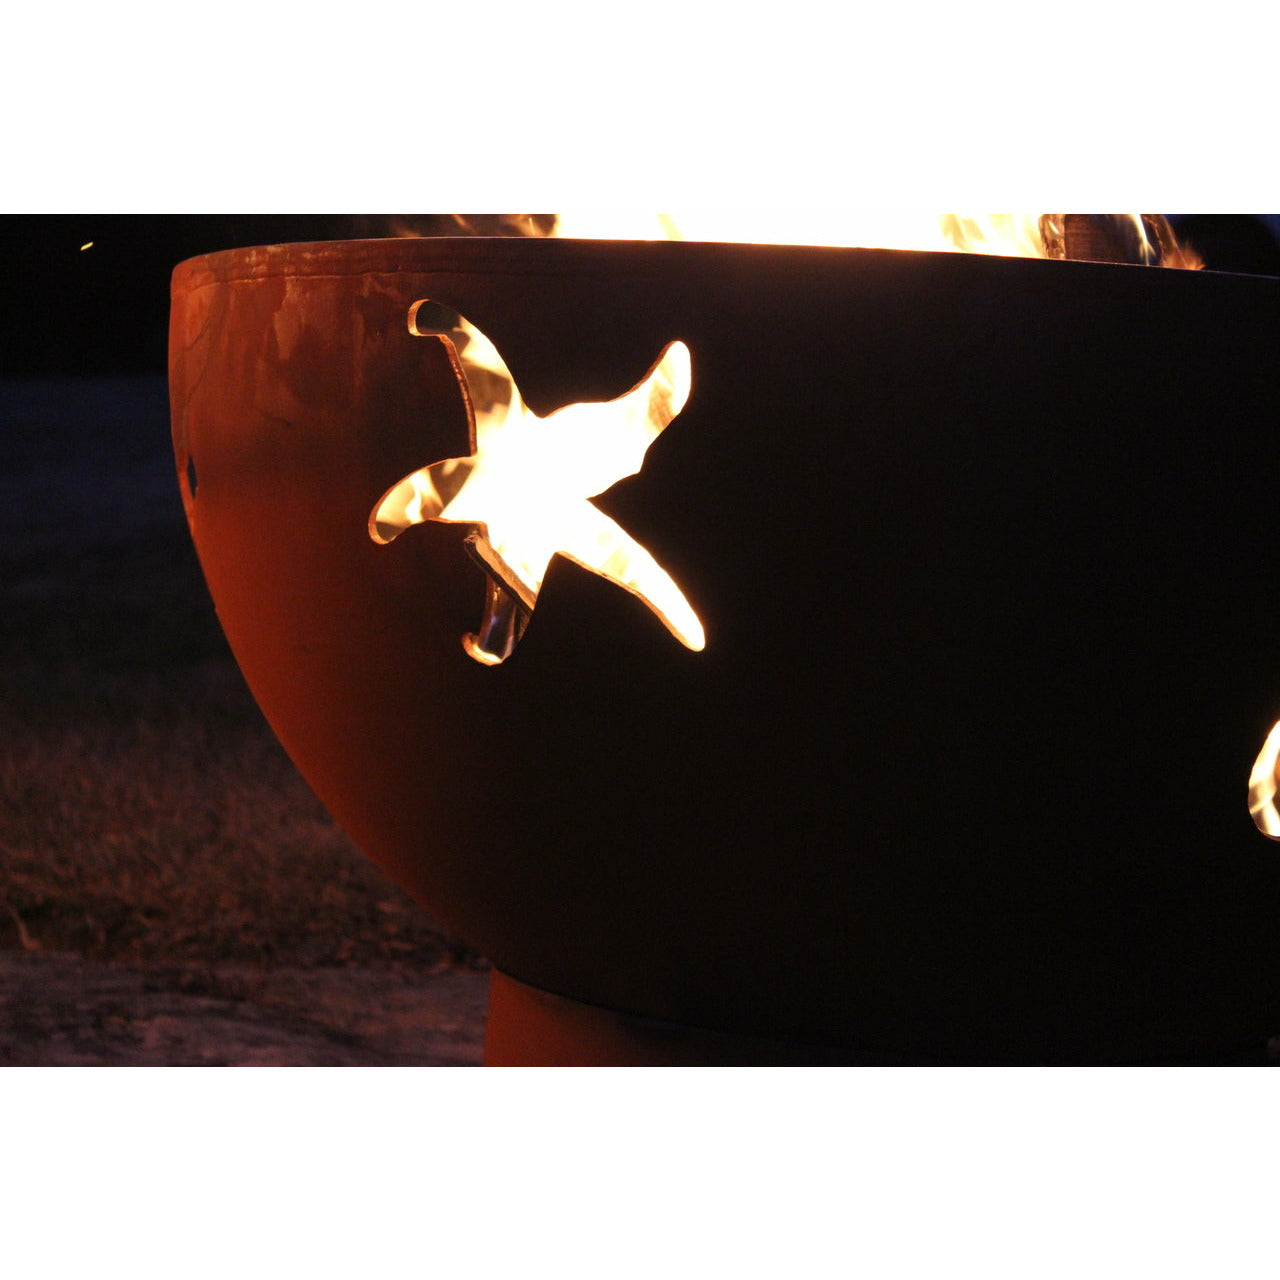 Sea Creatures by Fire Pit Art - Majestic Fountains